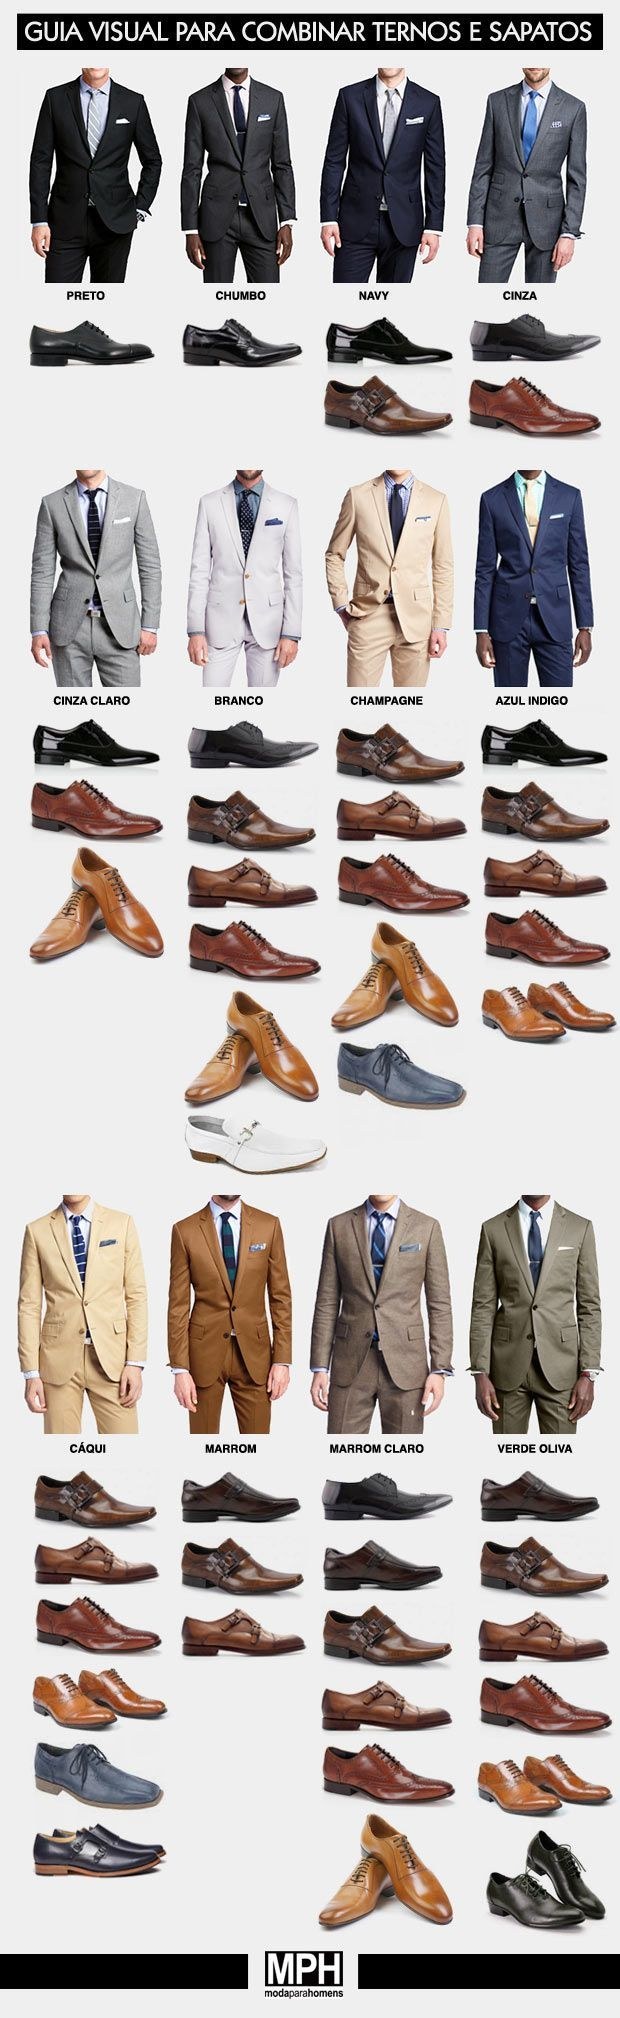 Once you've got your suit figured out, you can pick the best shoes to go with it.